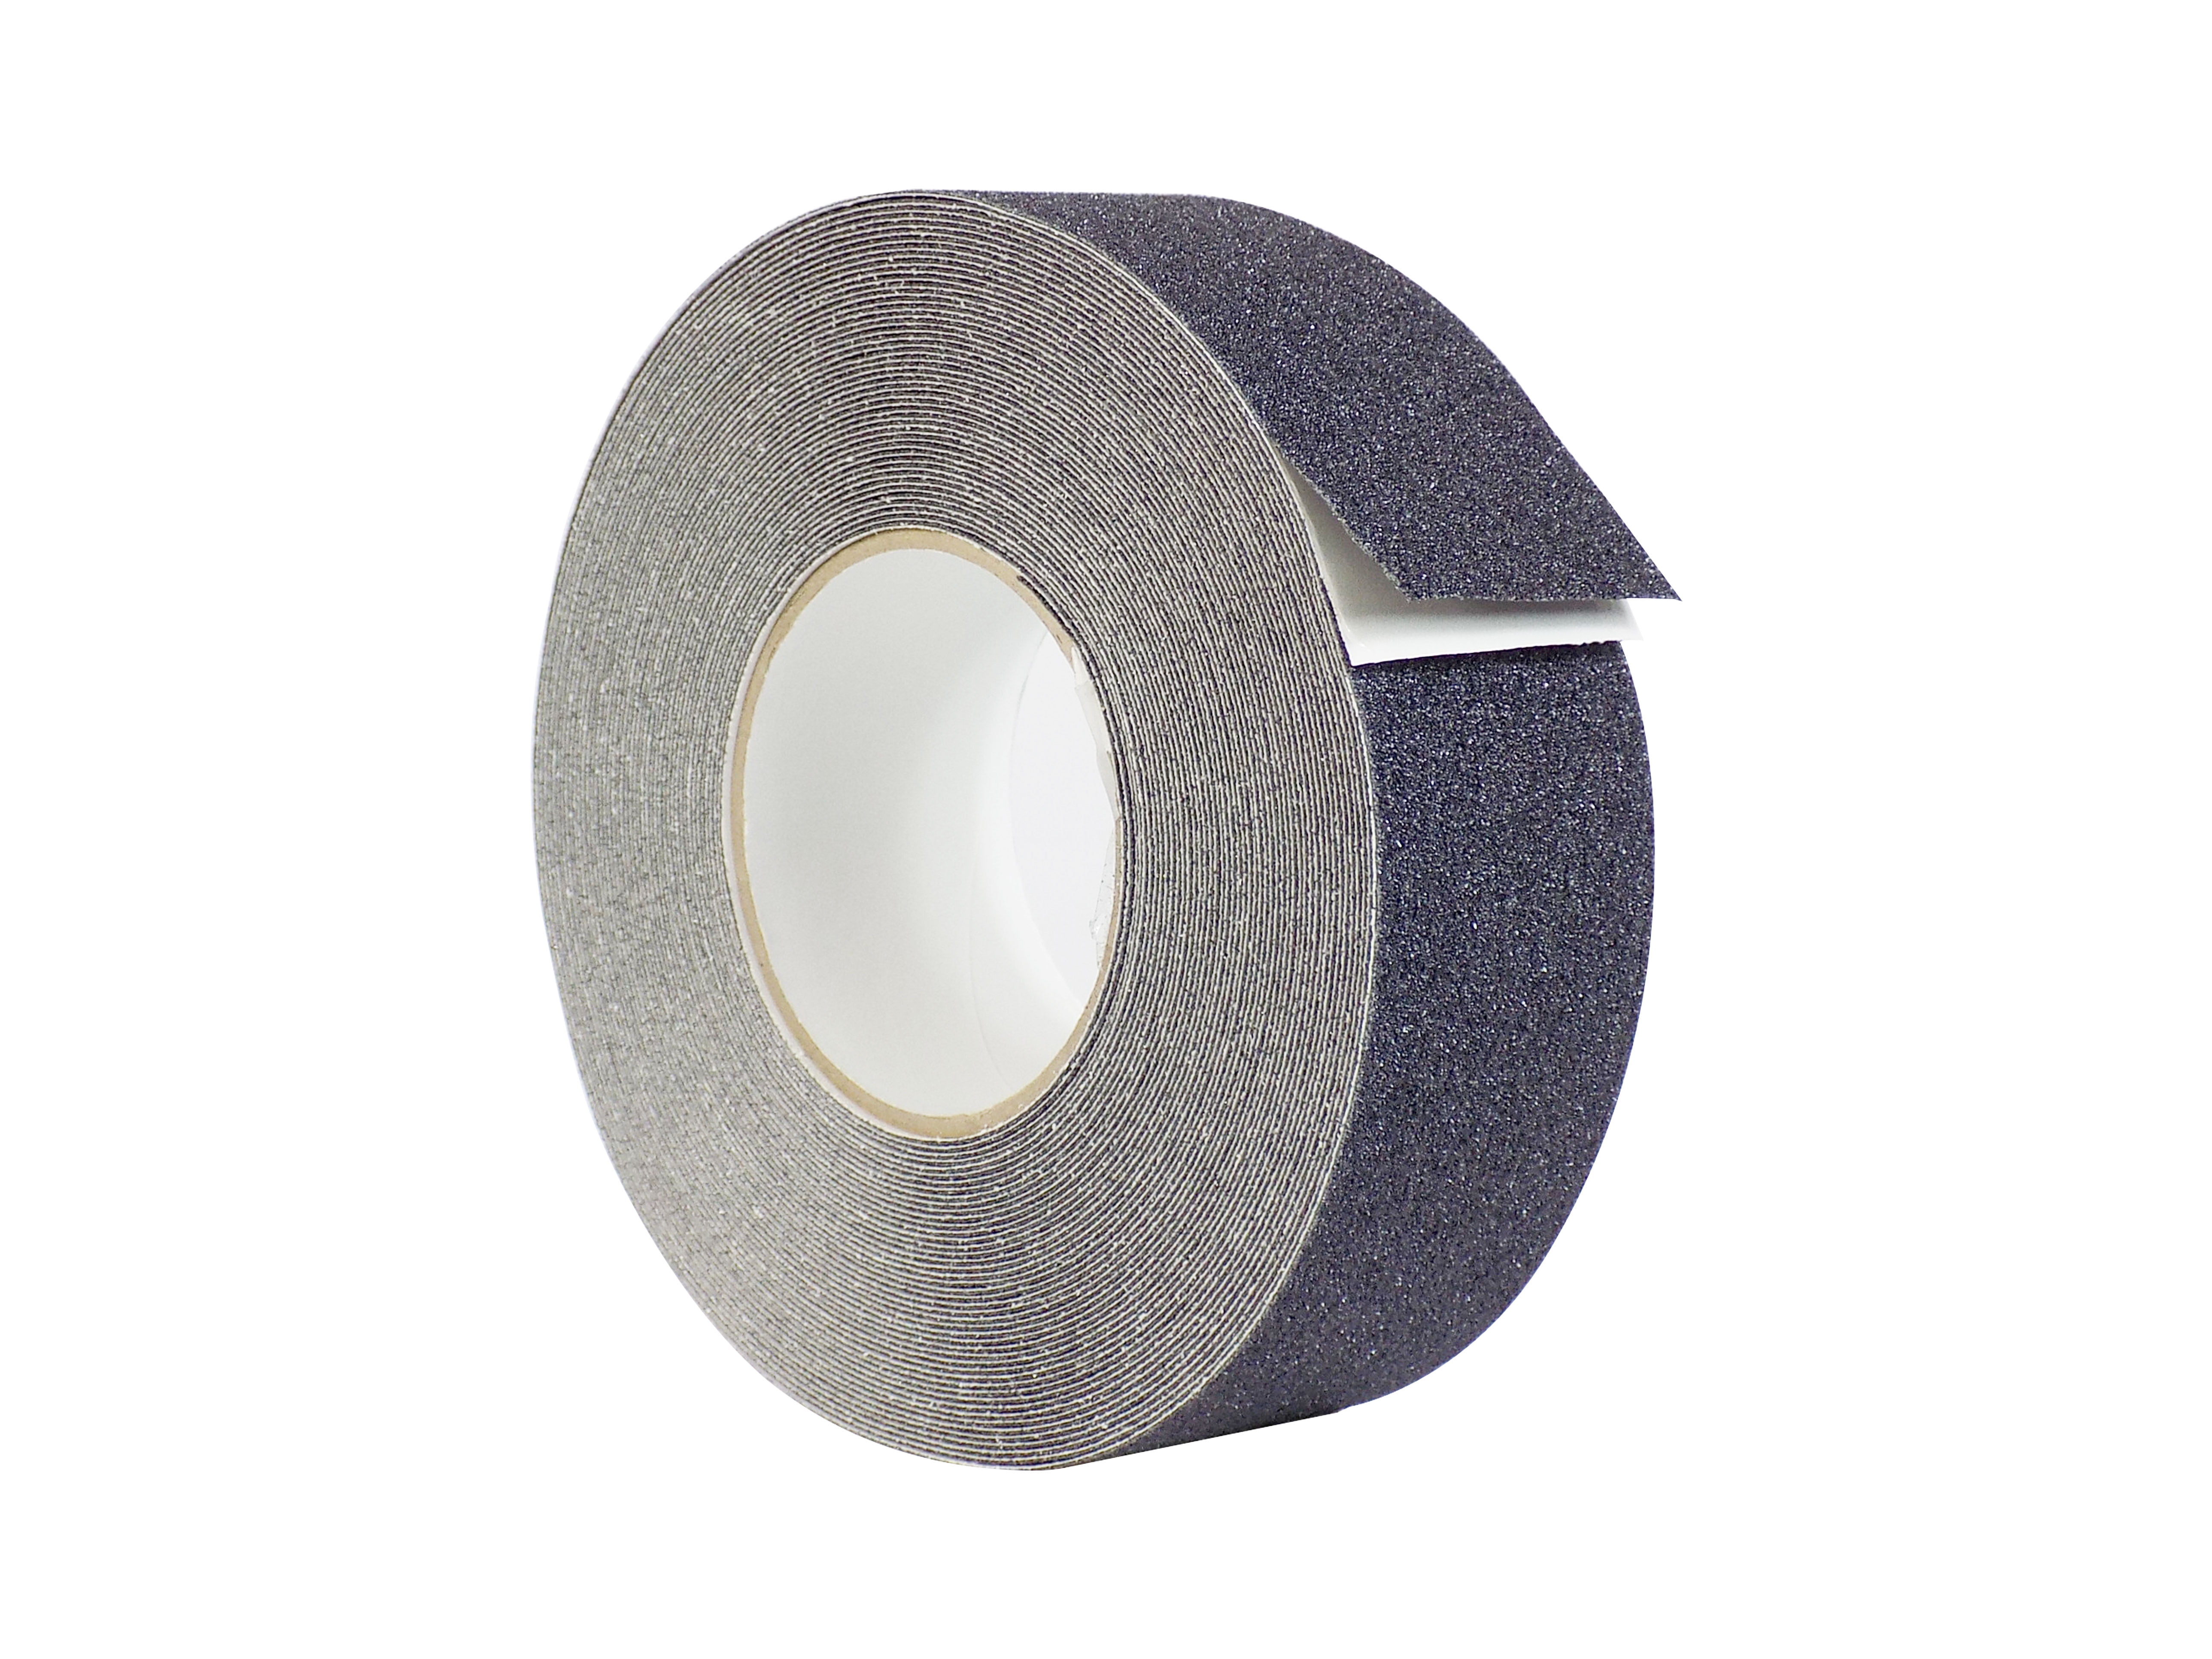 Details about   Anti-Slip Grip Tape Roll Anti-Skid Tape with High Traction 4 Inch x 30 Foot 